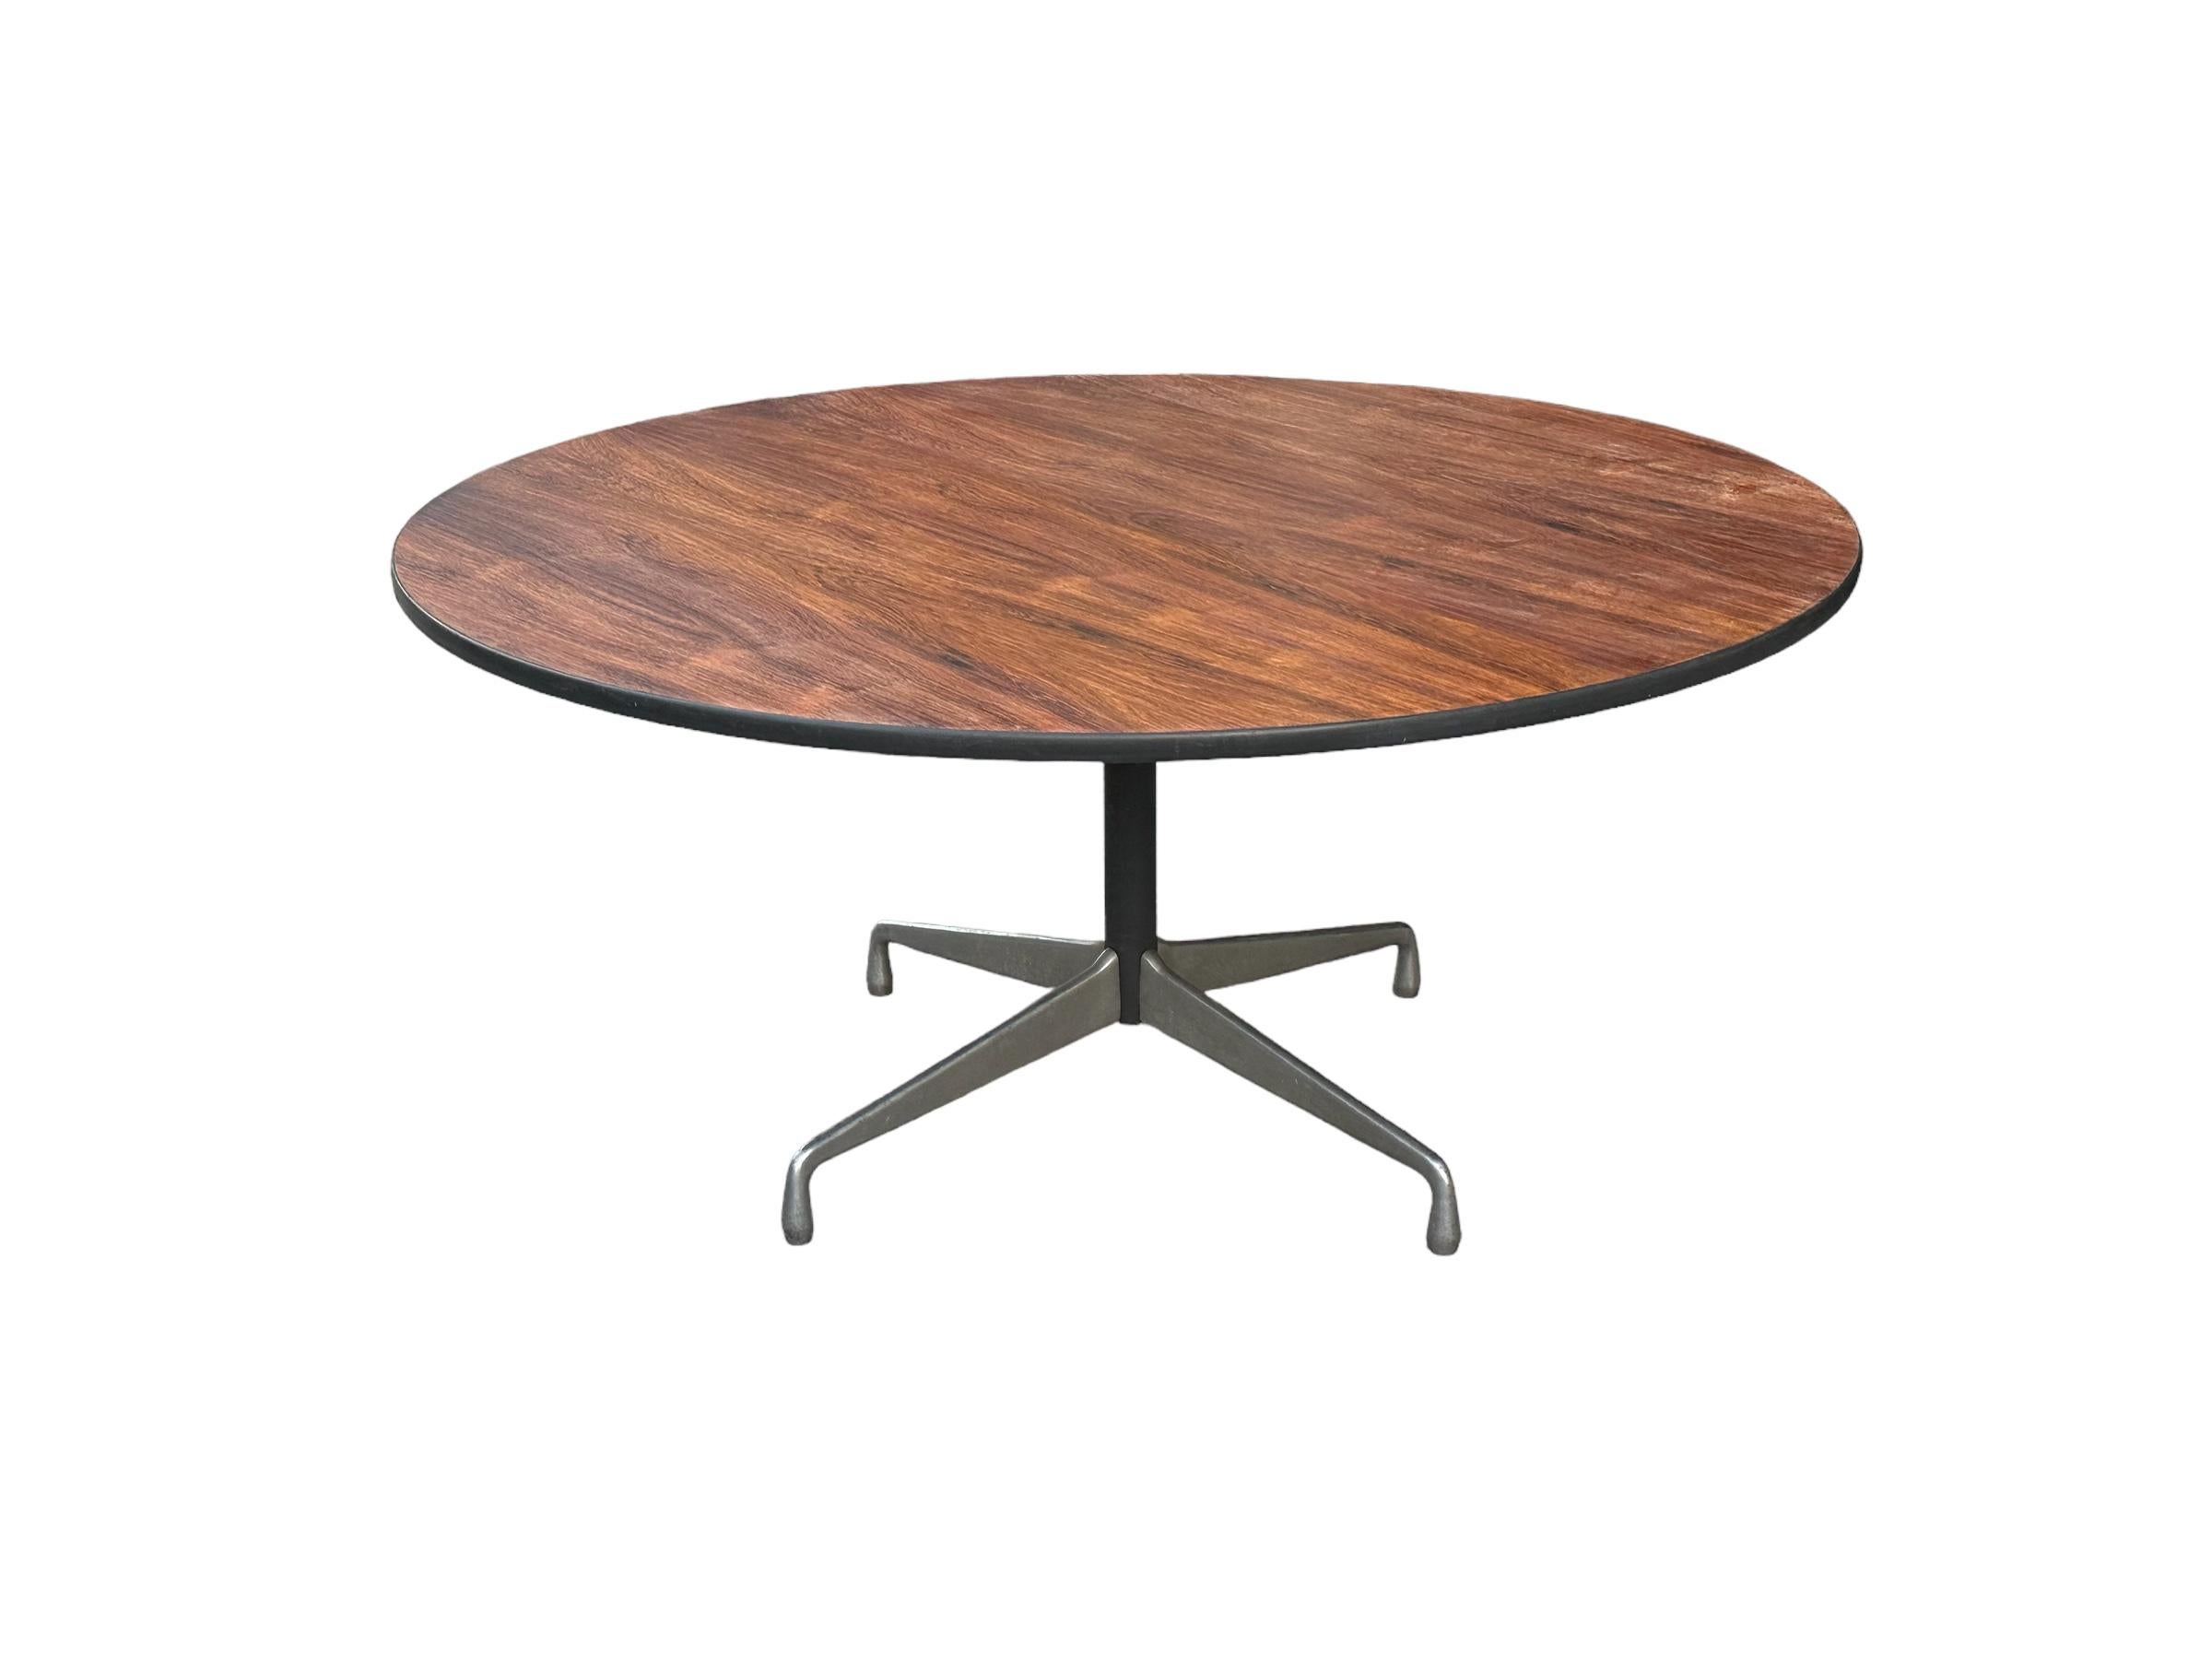 Rare large custom Eames dining table by Herman Miller. Lustrous circular Brazilian rosewood surface atop cast aluminum legs. Incredible color and grain pattern. 5 feet in diameter, easily seats 6, and can even accommodate up to 8 side chairs. Top